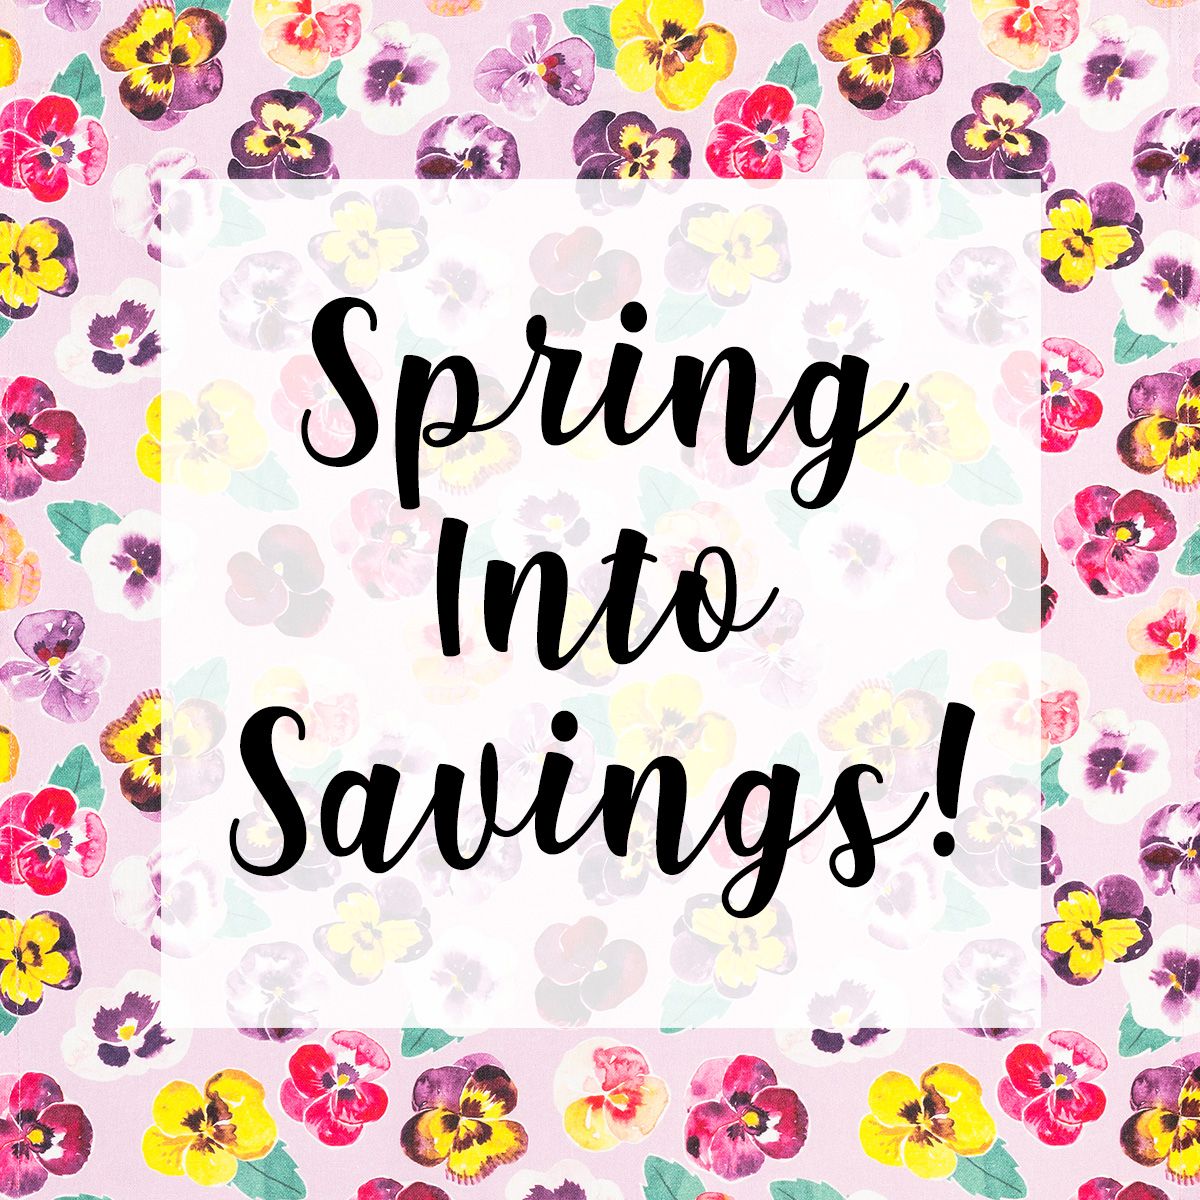 Spring Into Savings promo ends April 30! Receive discounts or dating on orders of in-stock merchandise. 